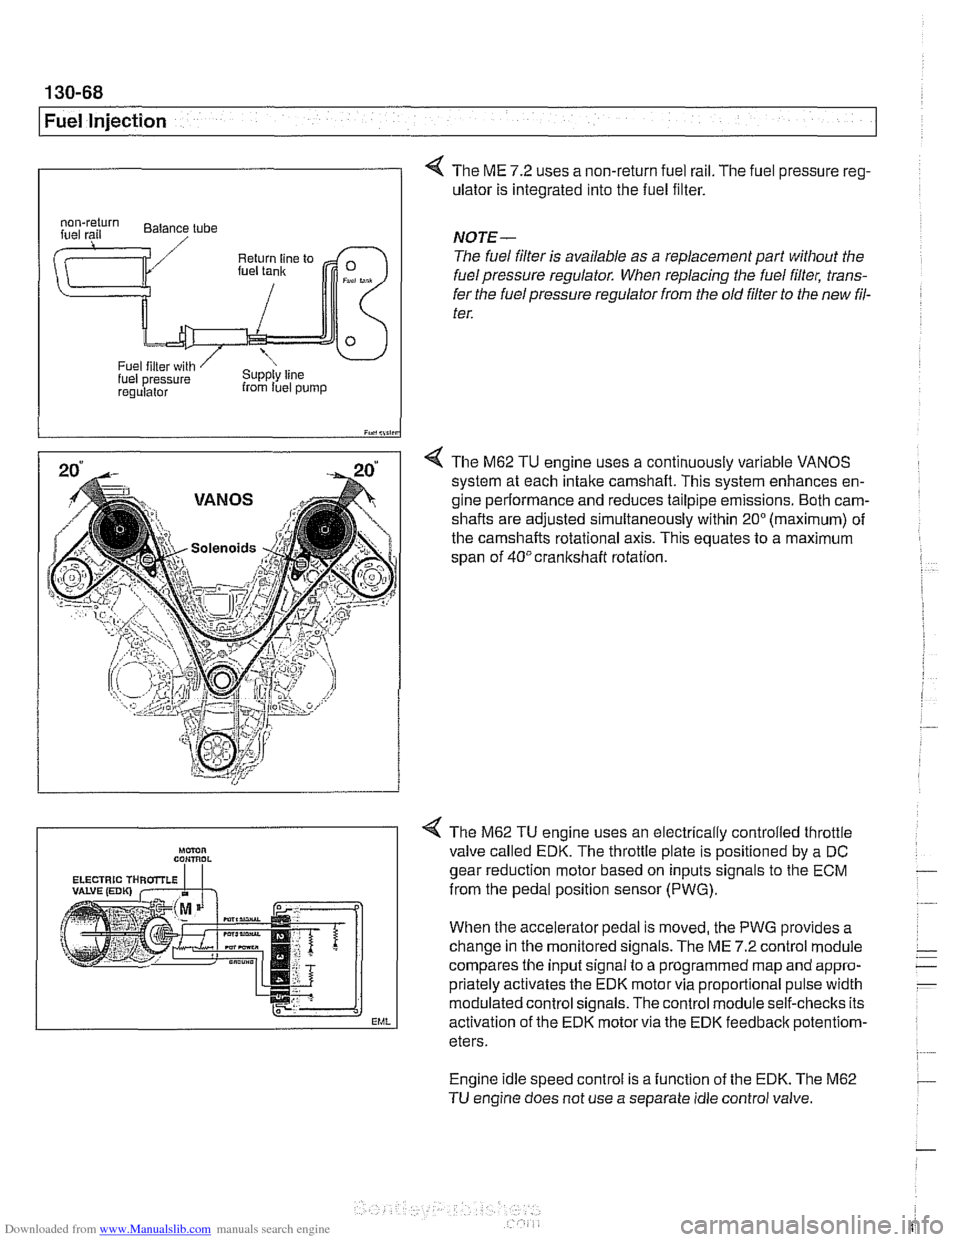 BMW 530i 1997 E39 Workshop Manual Downloaded from www.Manualslib.com manuals search engine 
130-68 
Fuel Injection 
0 
4 The ME 7.2 uses  a non-return  fuel rail. The fuel pressure  reg- 
ulator is  integrated  into the fuel  filter. 